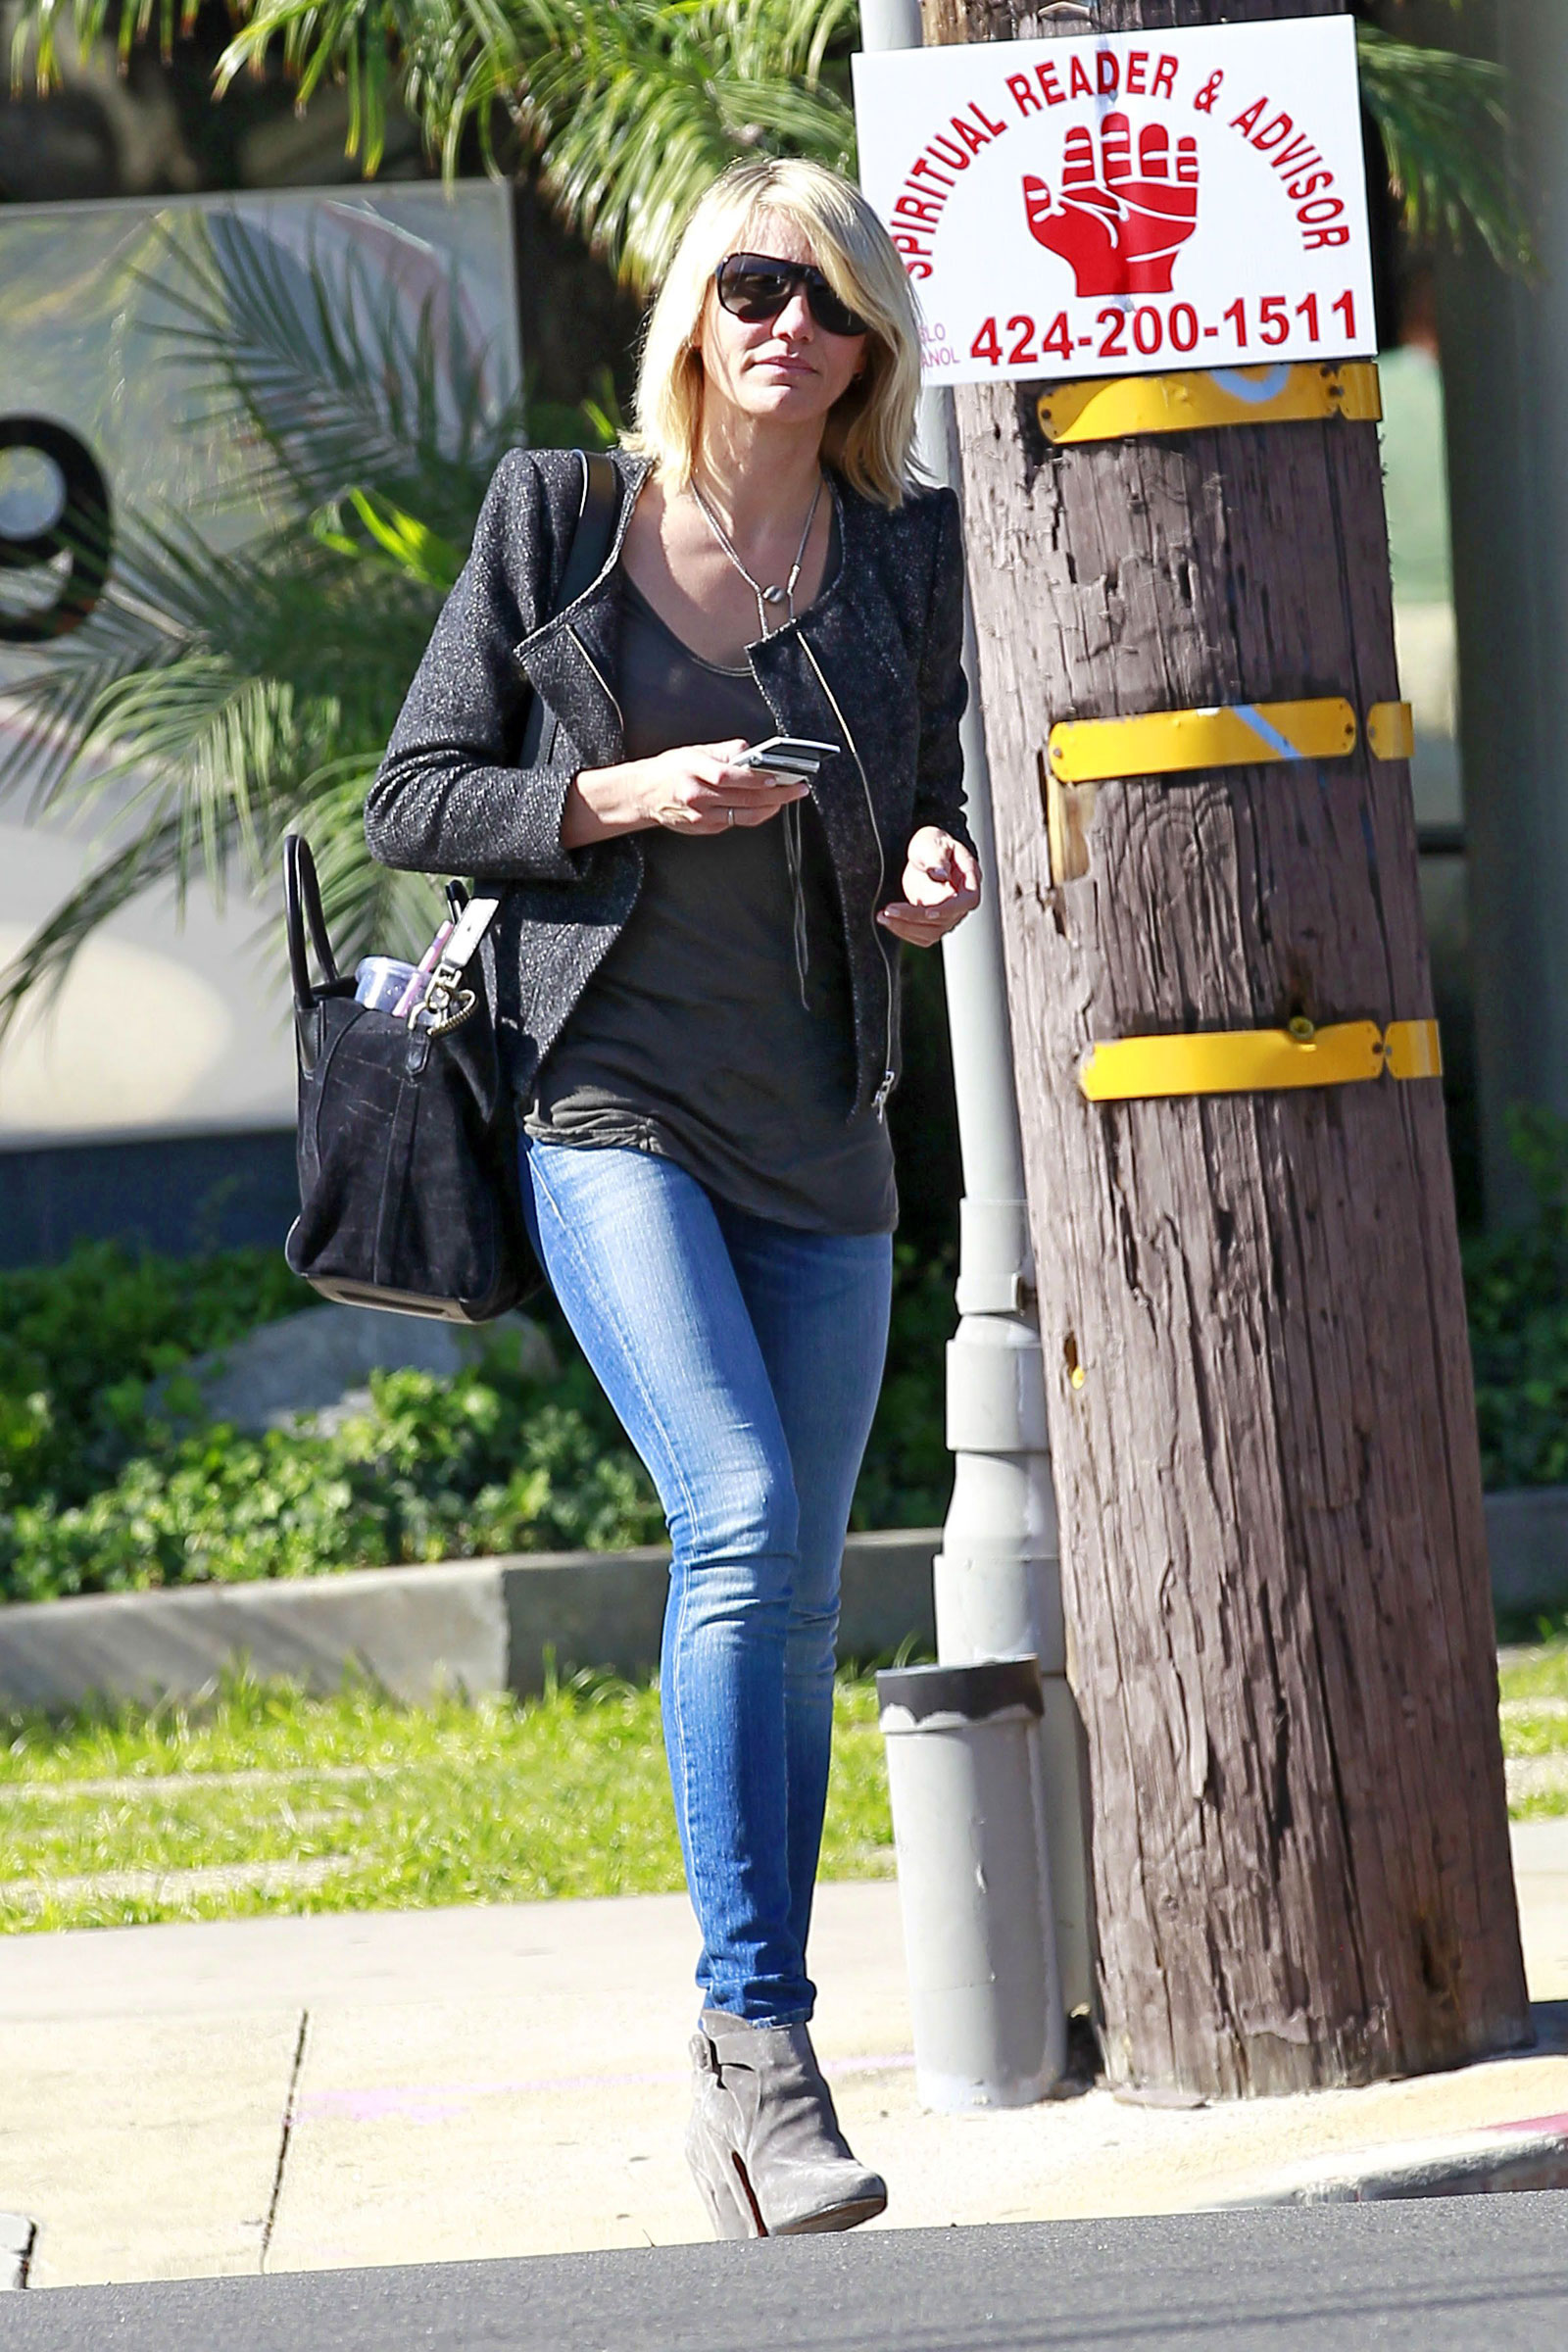 Cameron Diaz in Jeans Out and About in Los Anhgeles - HawtCelebs1600 x 2400